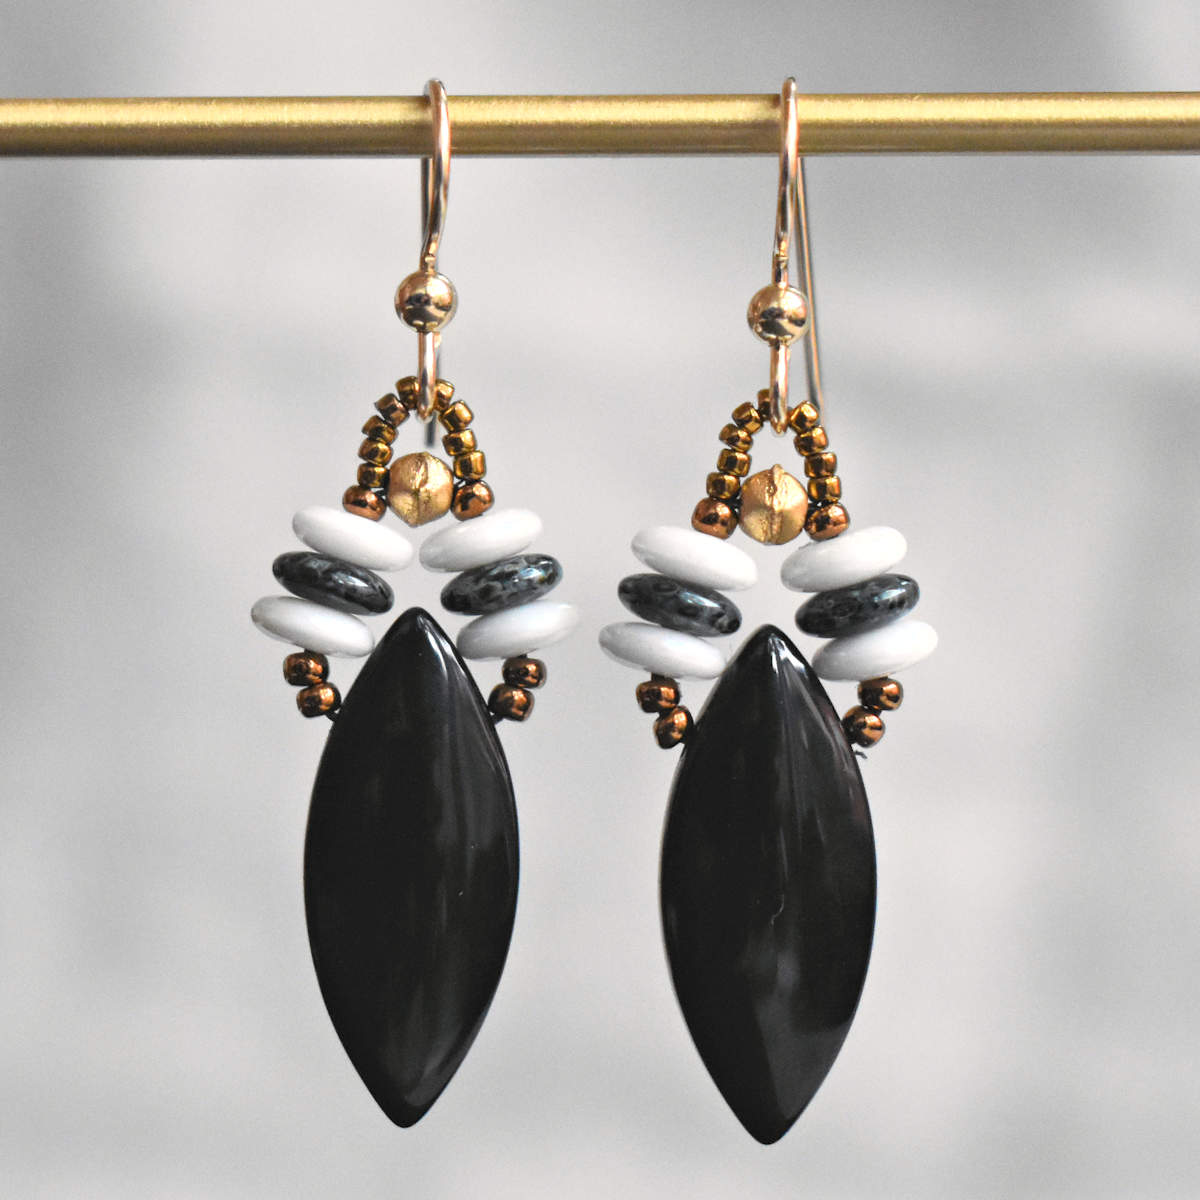 Black and white earrings hanging from a gold bar against a gray background. The earrings are made from black, pointed oval beads suspended from two stacks of black and white discs.